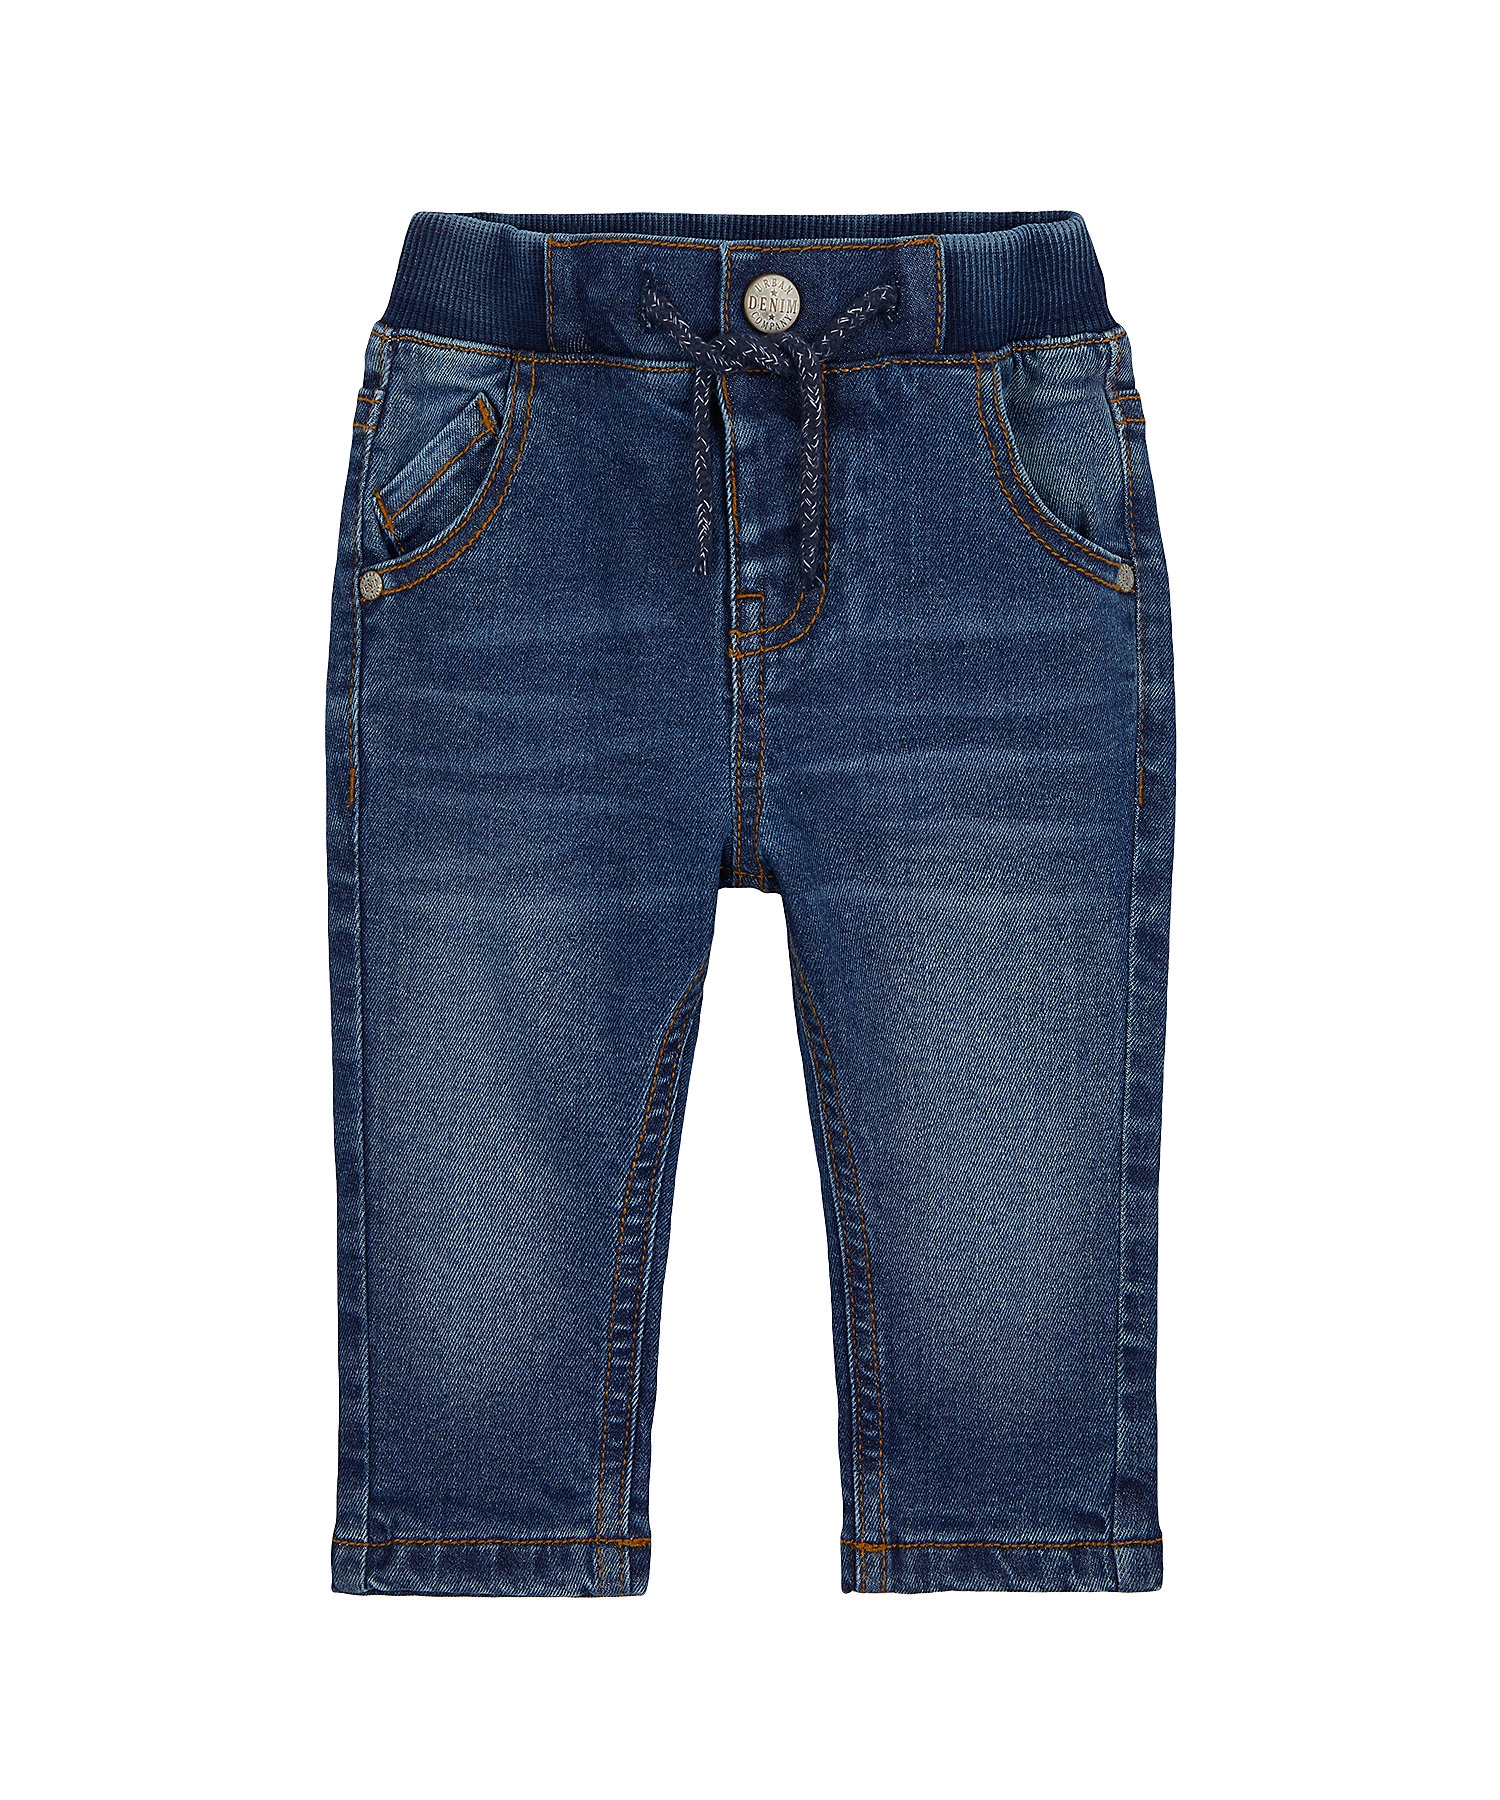 Mothercare | Boys Mid-Wash Jeans Fleece Lined - Blue